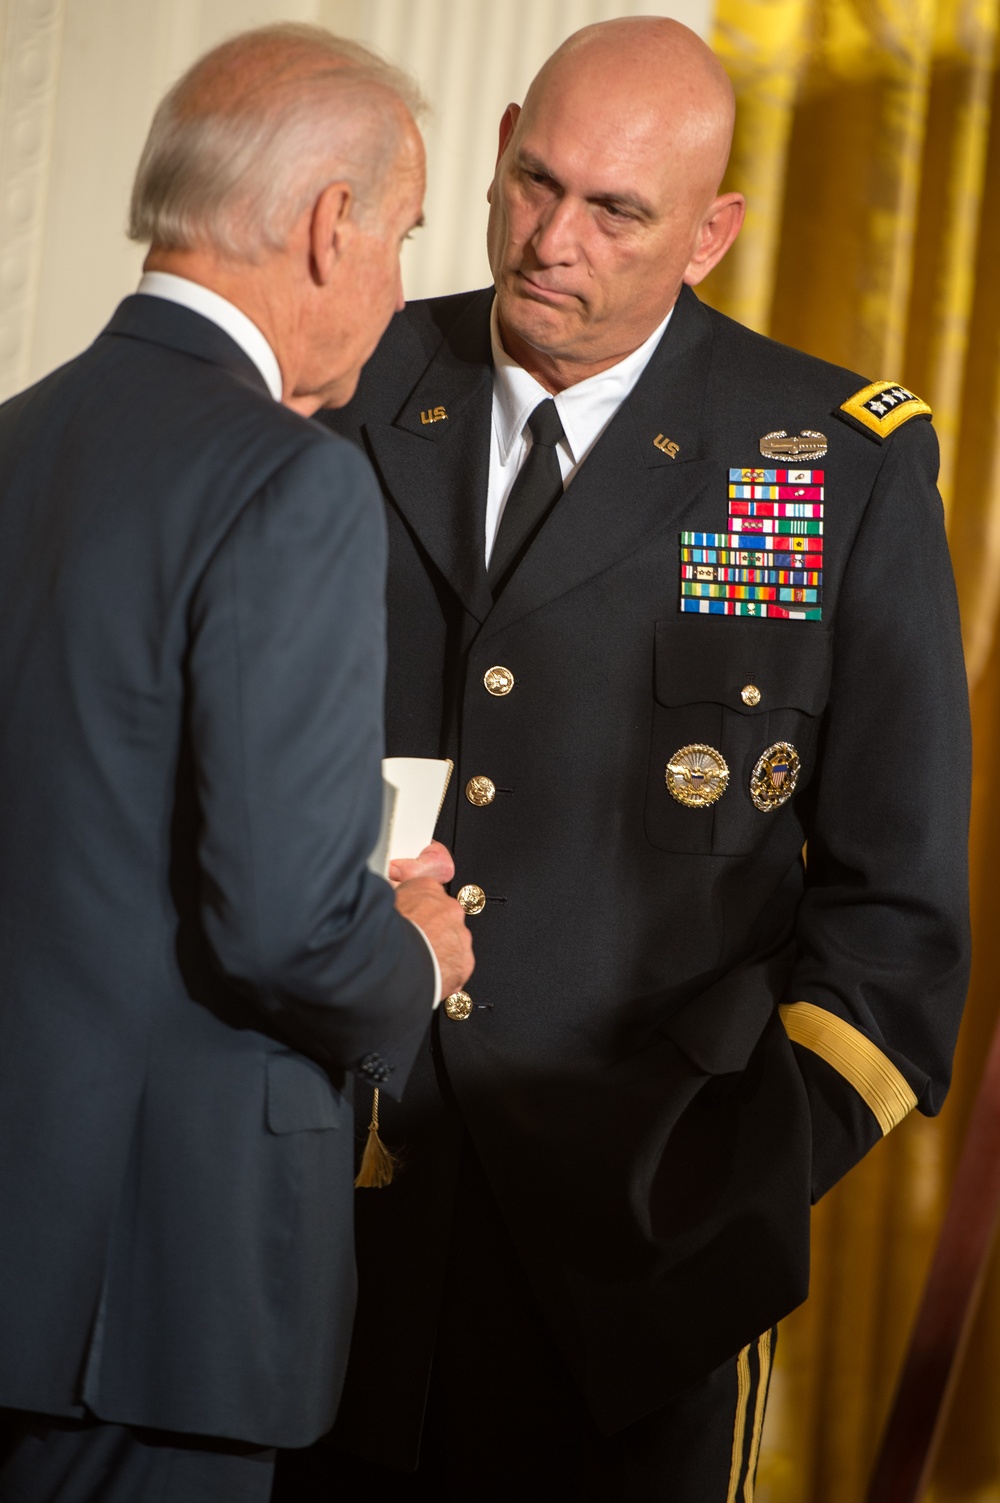 Medal Of Honor awarded to Capt. Swenson